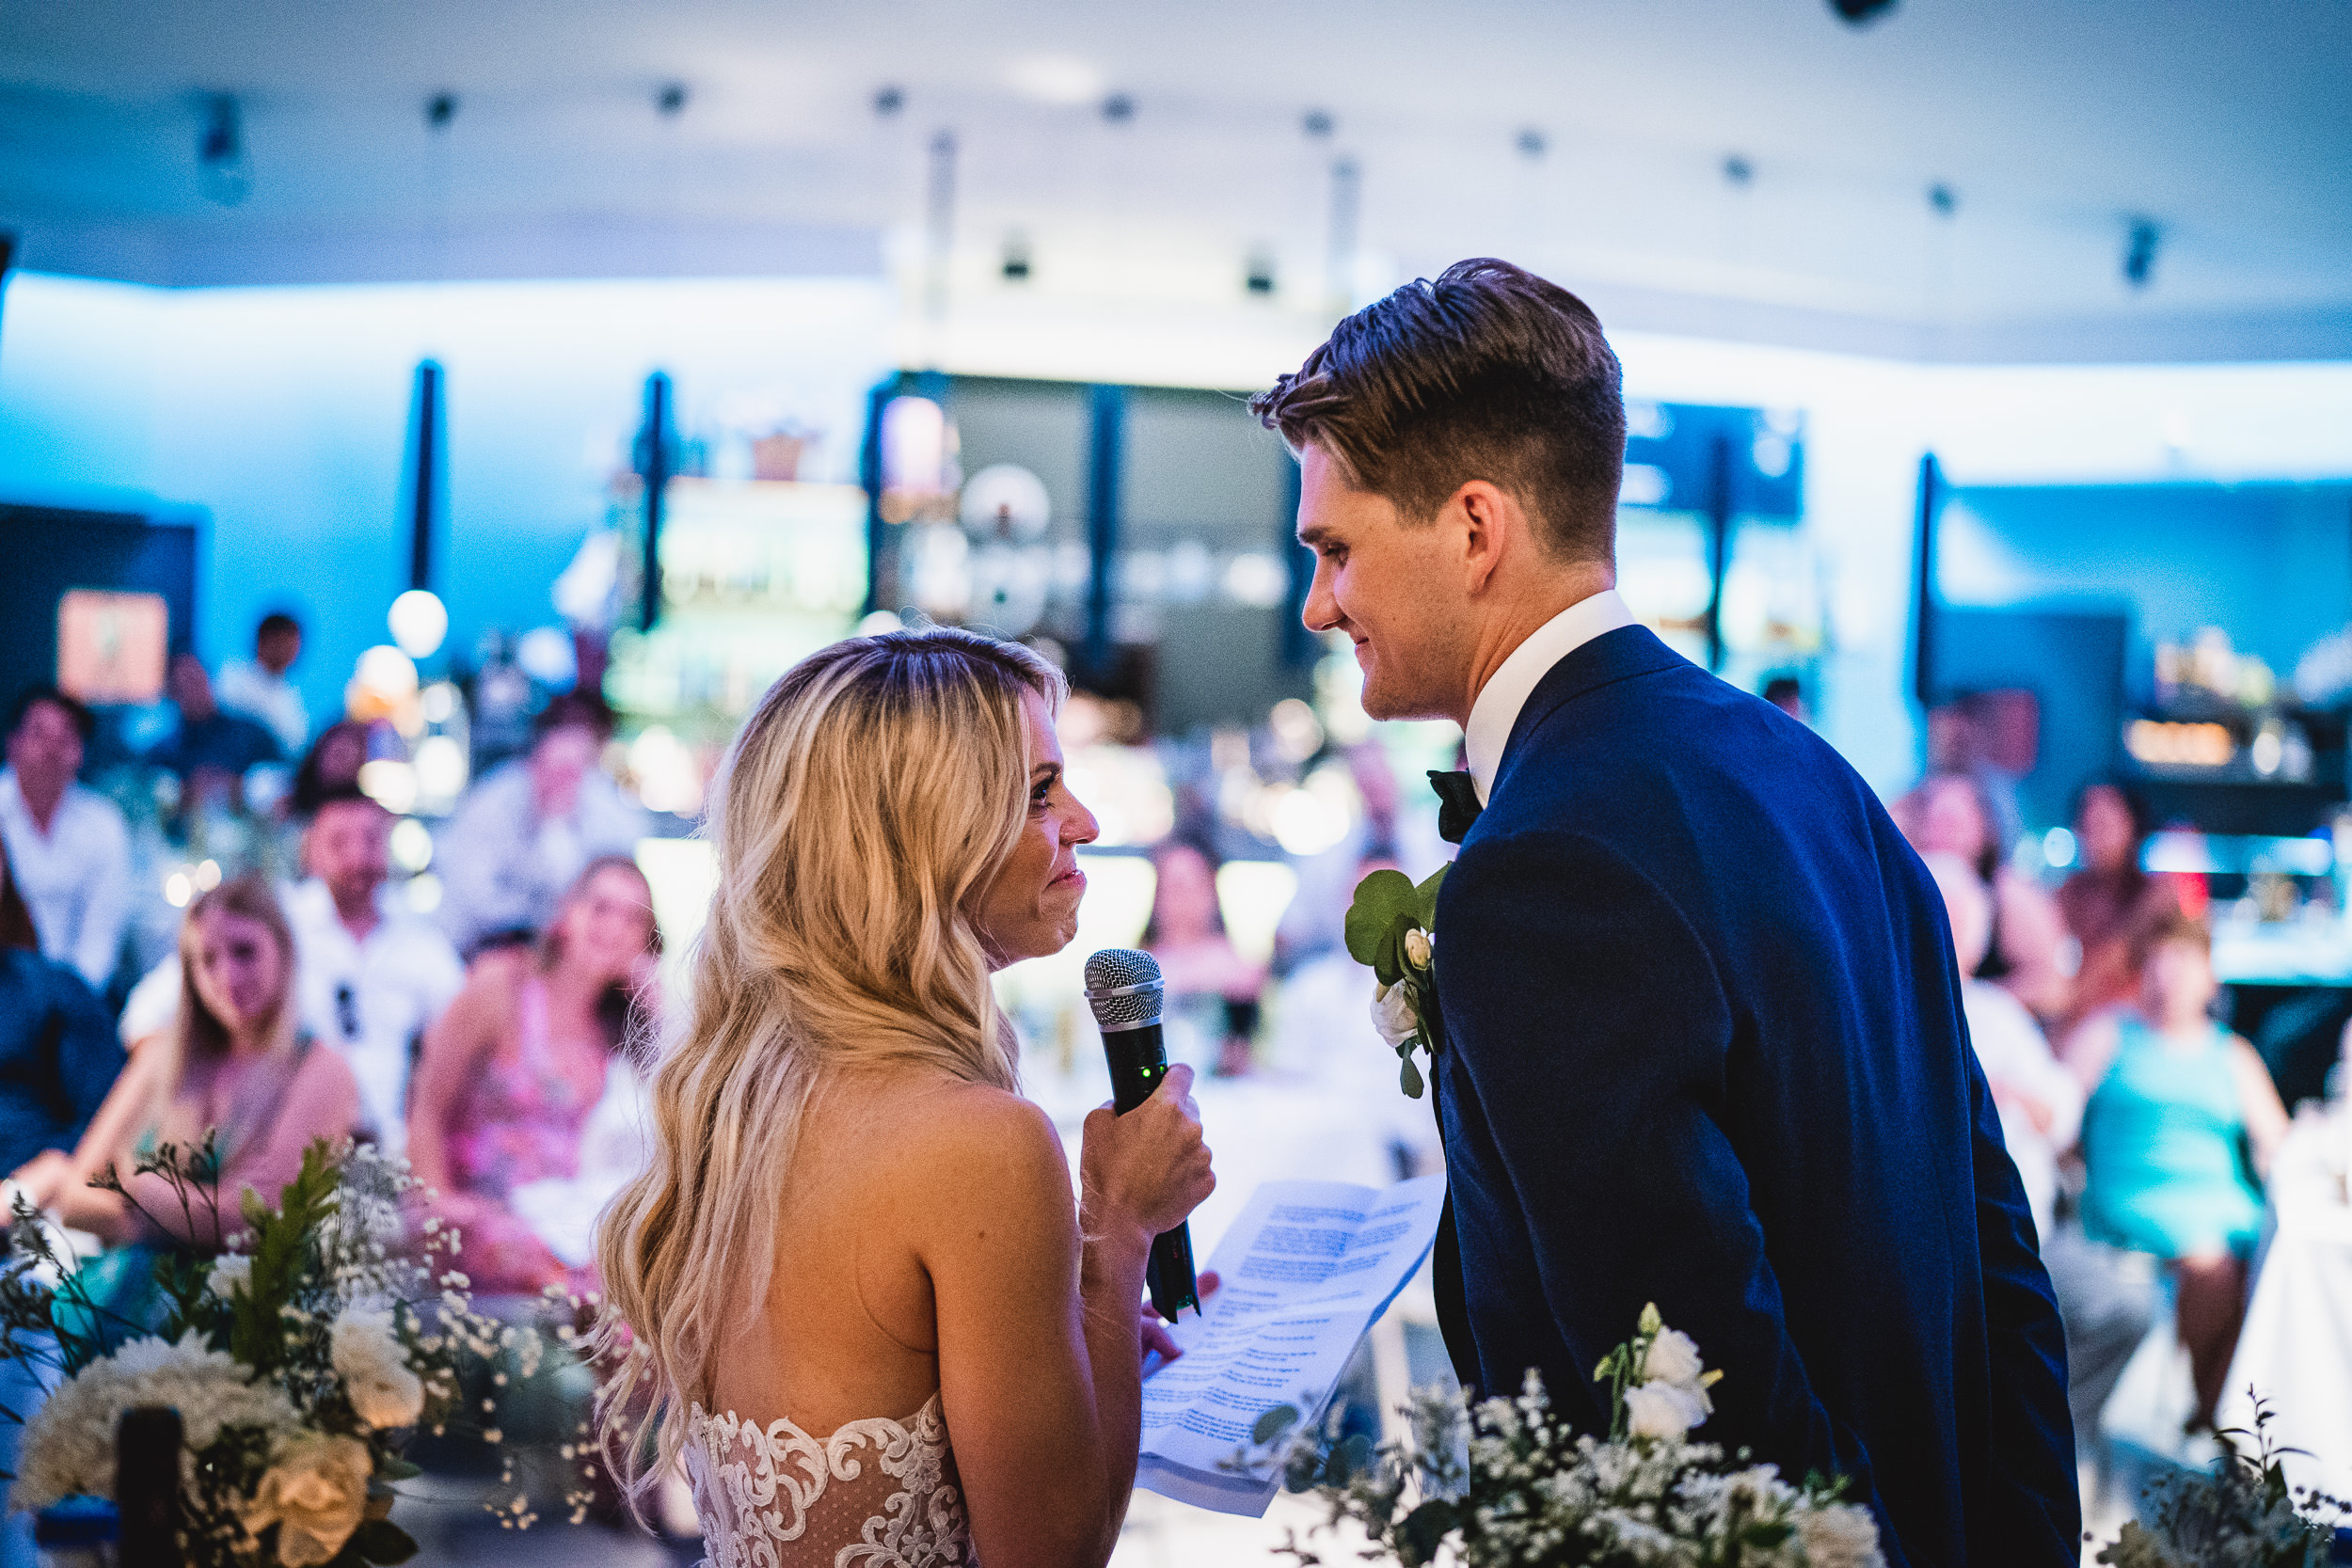 A groom and bride delivering a heartfelt speech during their wedding reception, captured in a beautiful wedding photo.